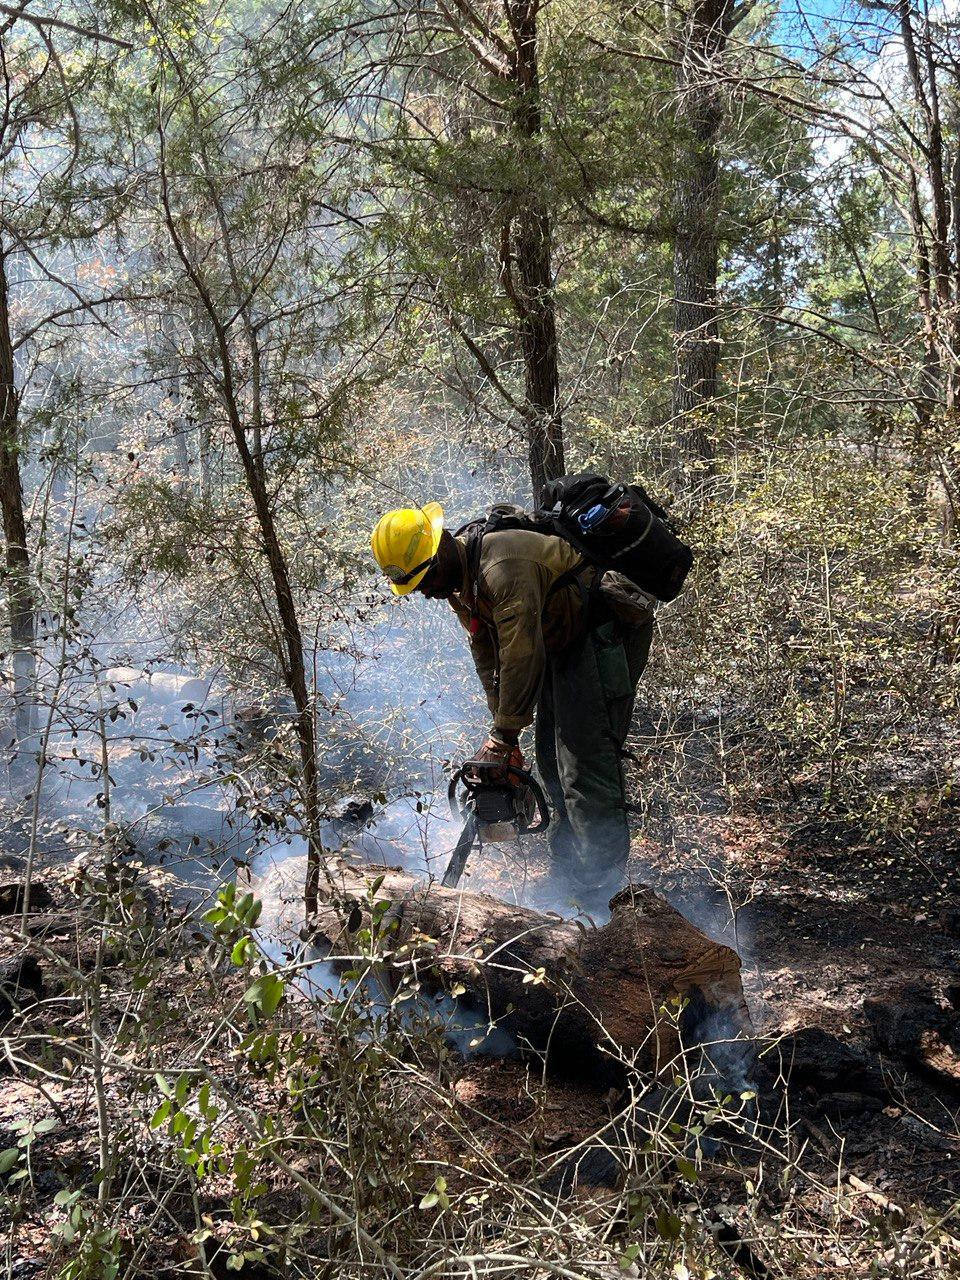 A firefighter uses a chainsaw to cut a black, burned log laying across the forest floor.